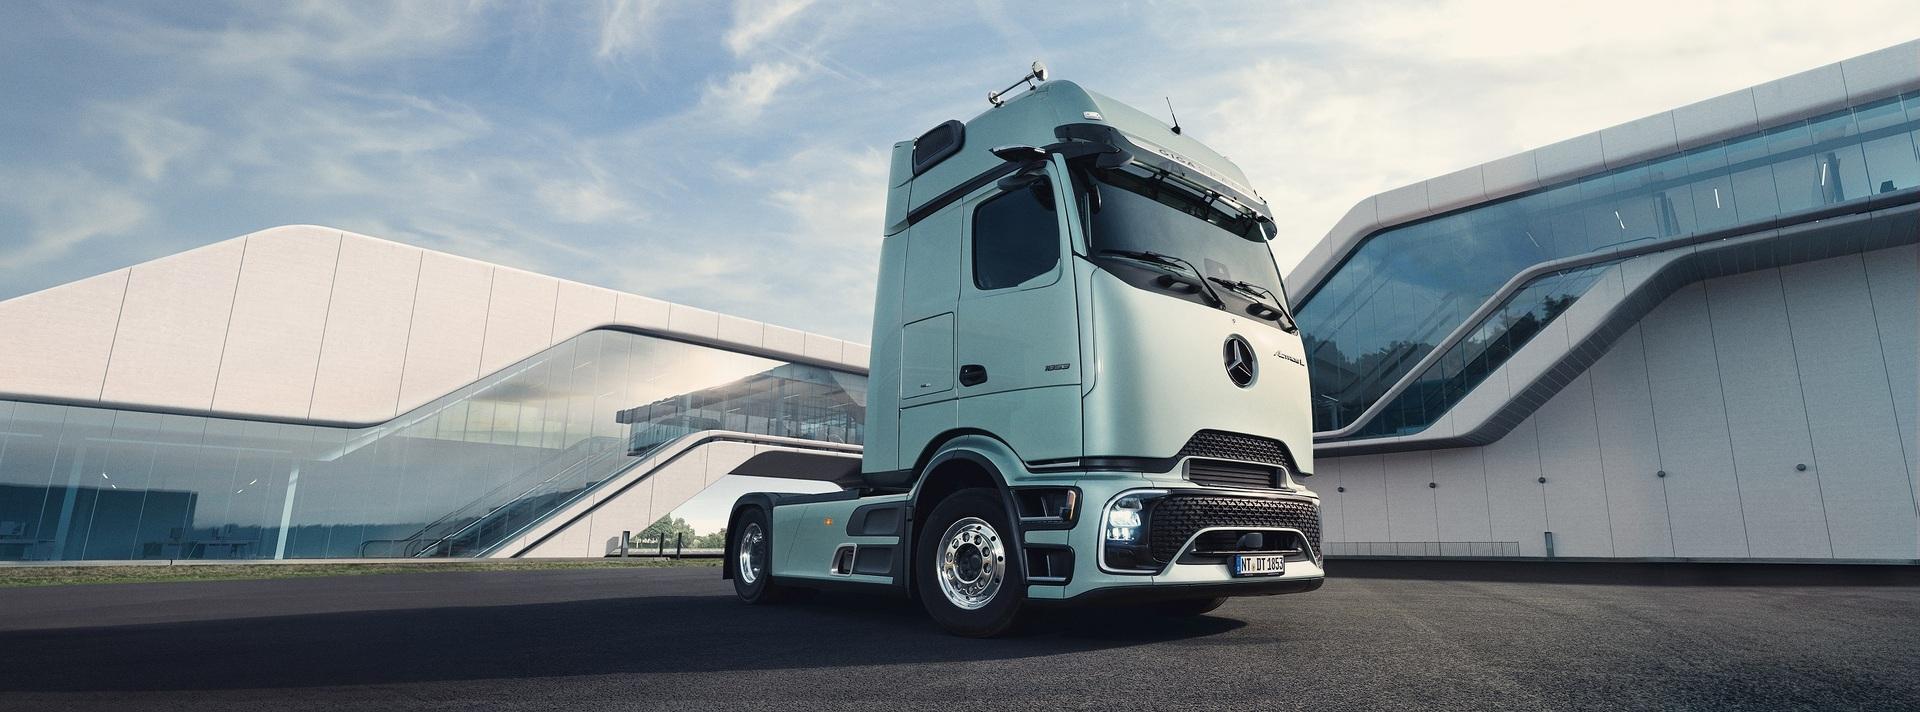 Daimler Trucks-The new Actros L from Mercedes-Benz Trucks with its futuristic